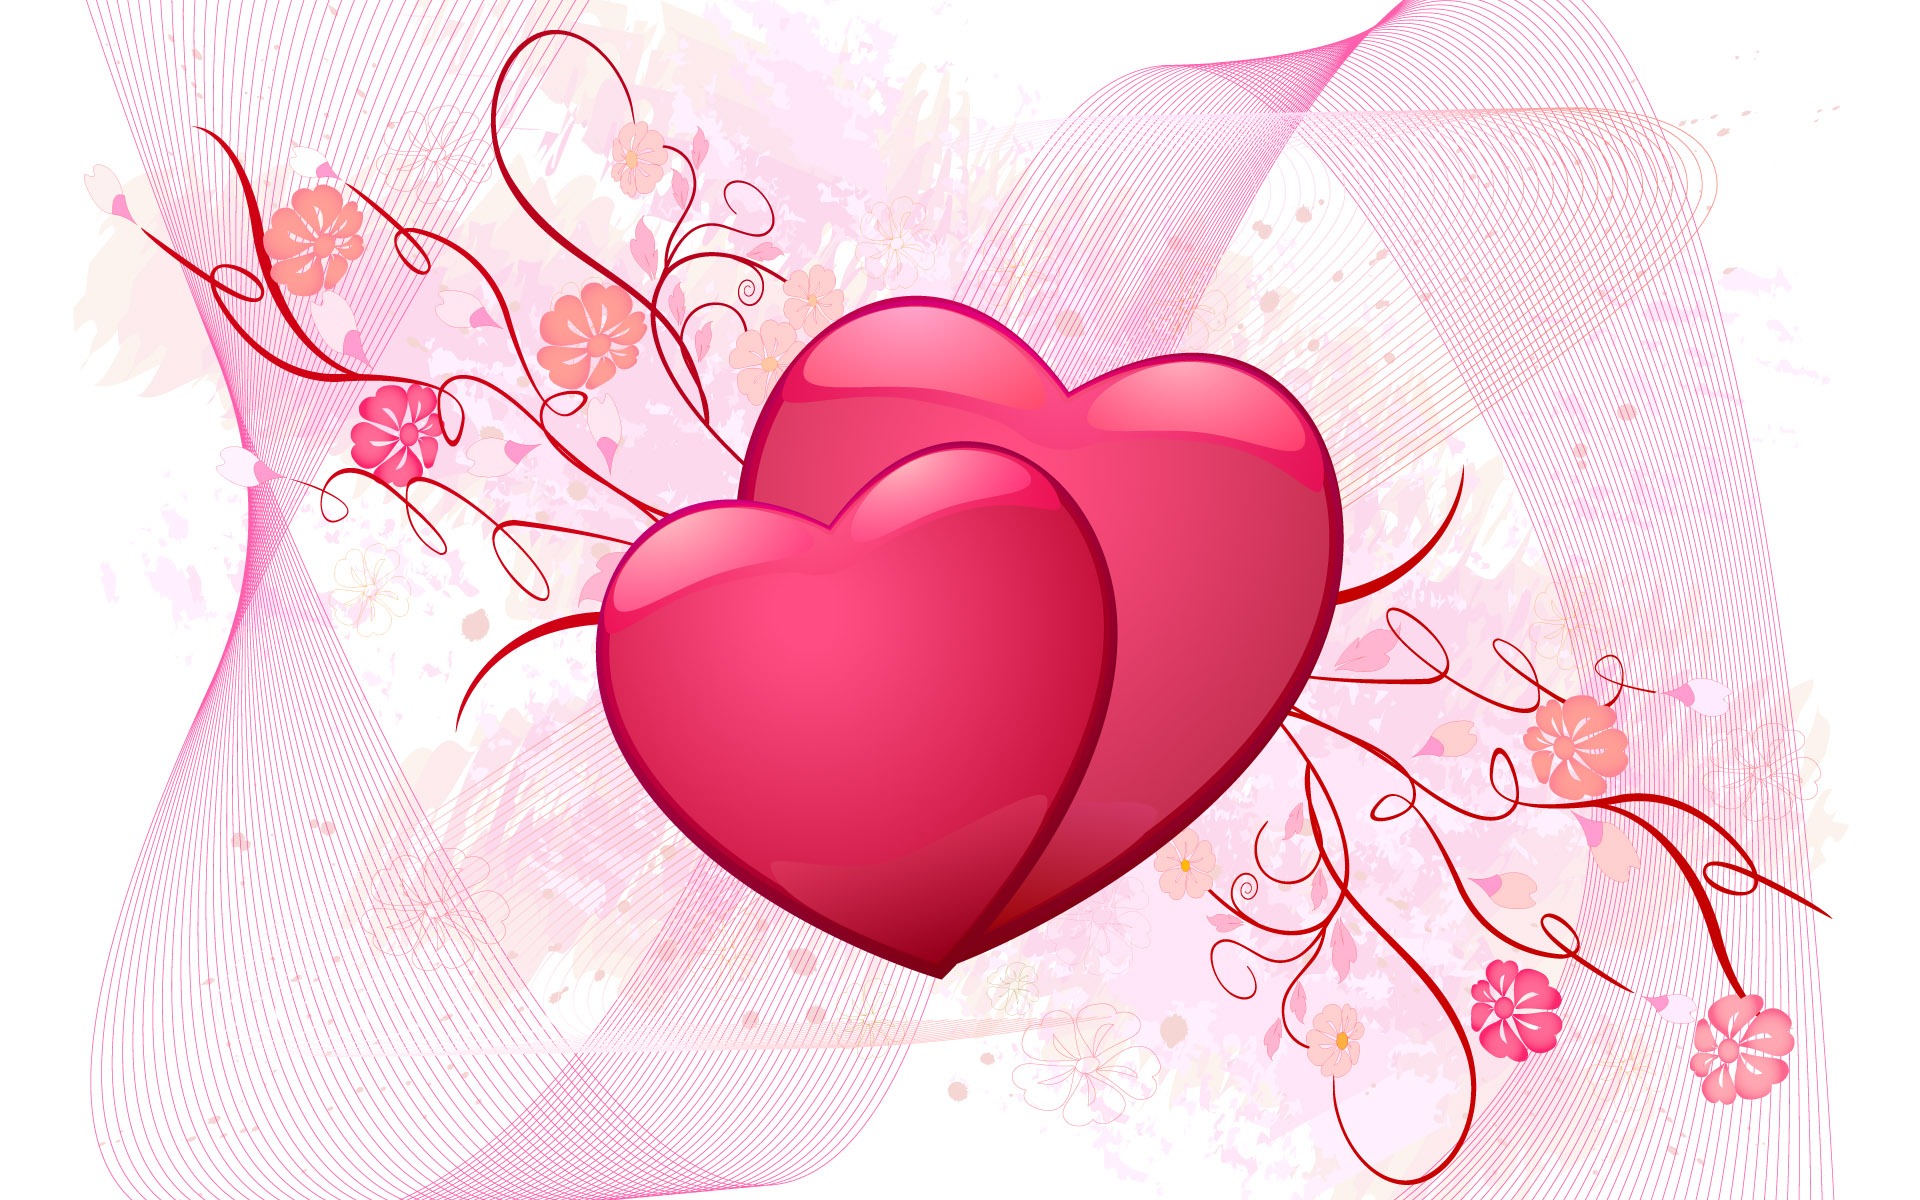 Valentine's Day Love Theme Wallpapers #24 - 1920x1200